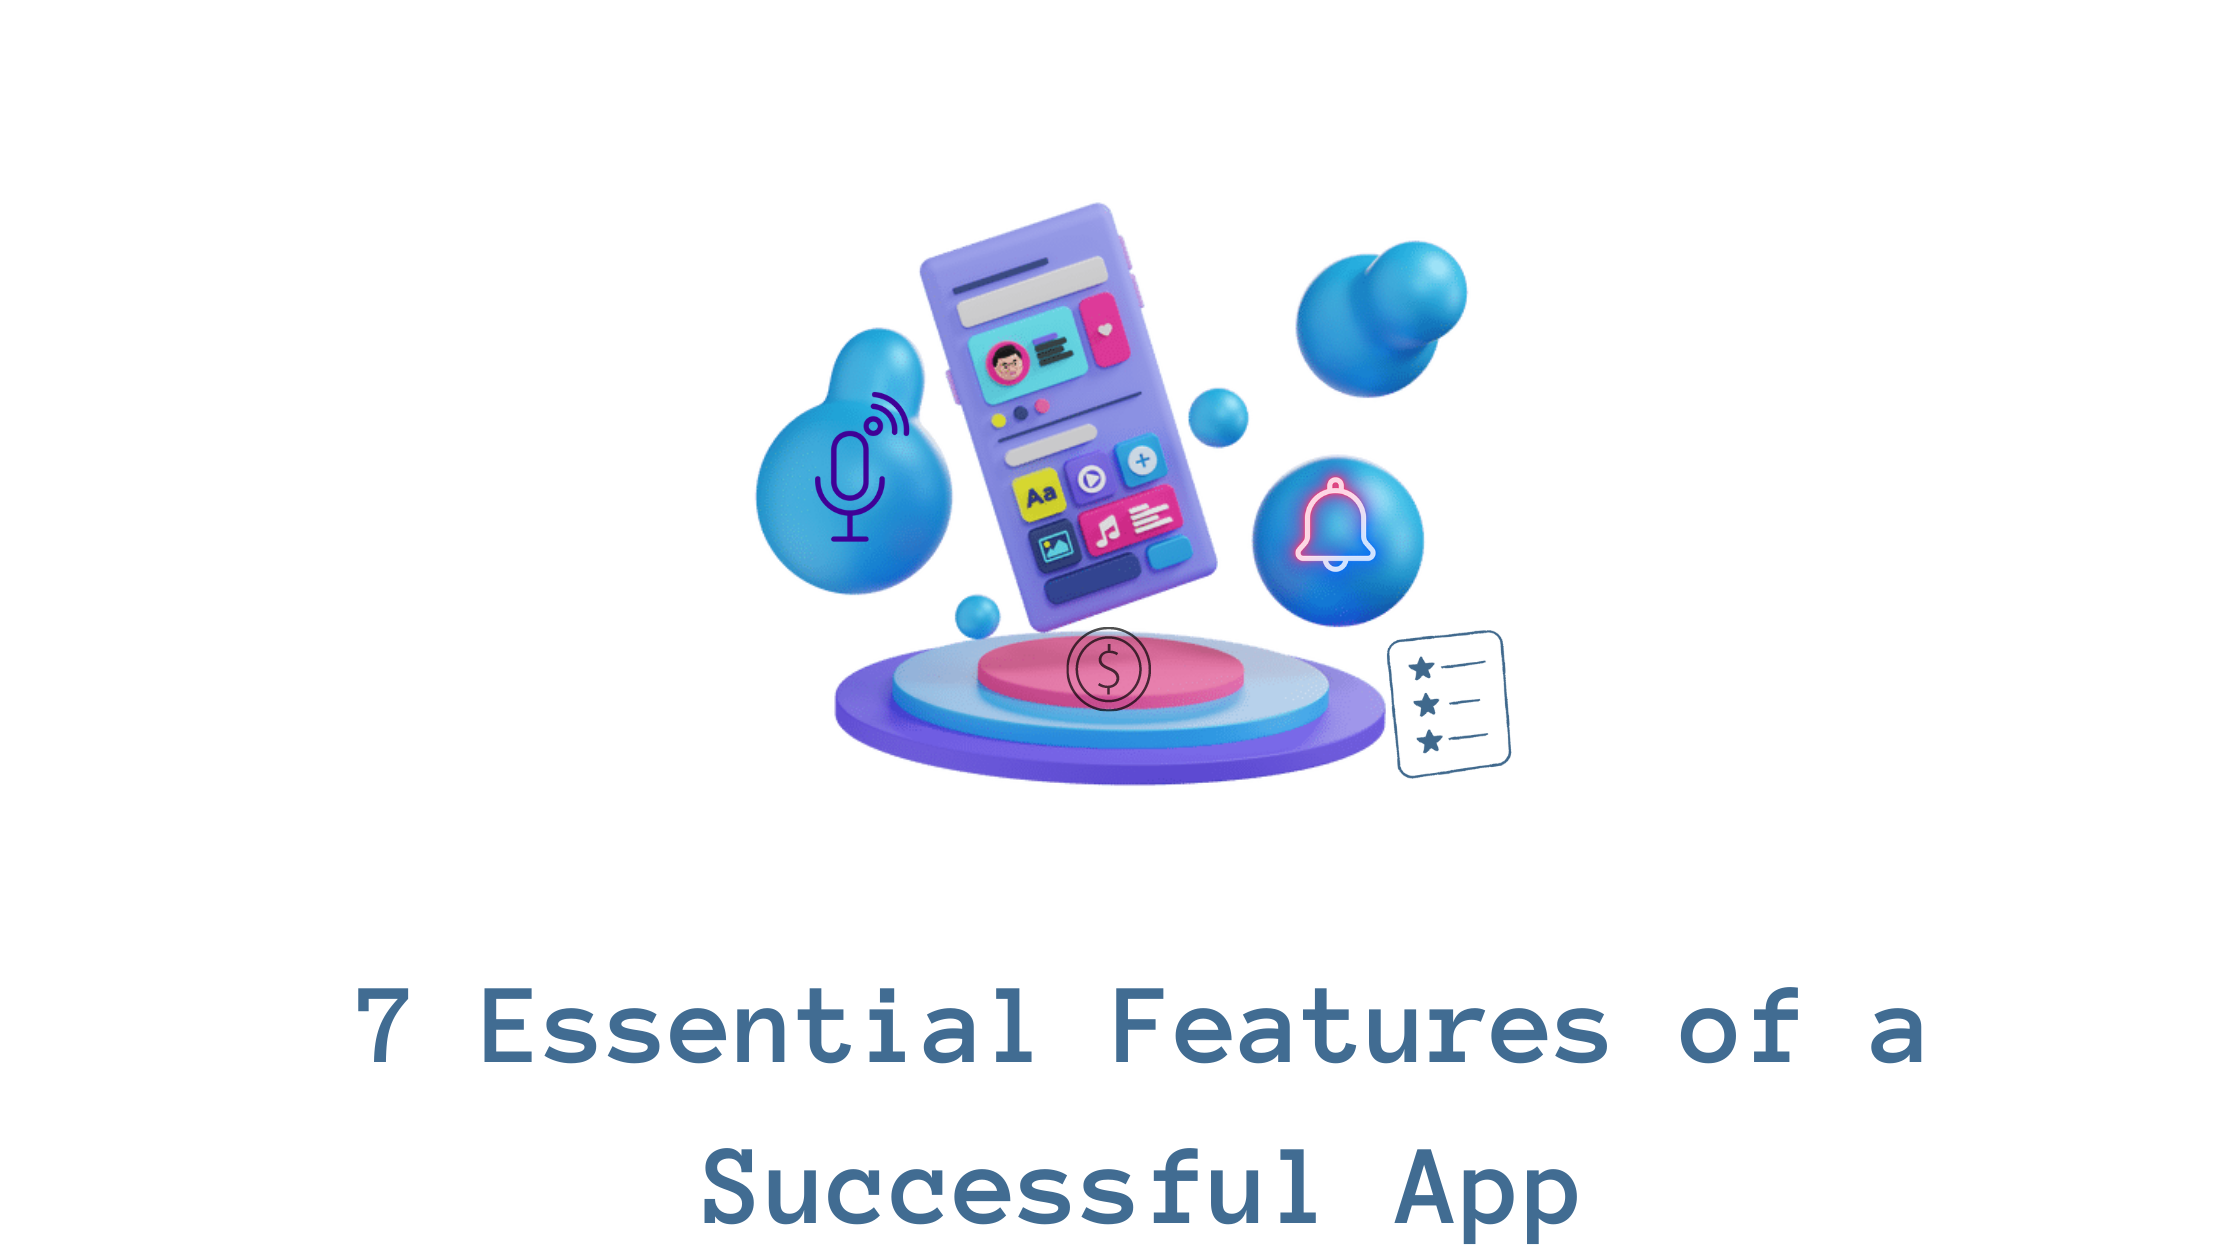 7 Essential Features of a Successful App